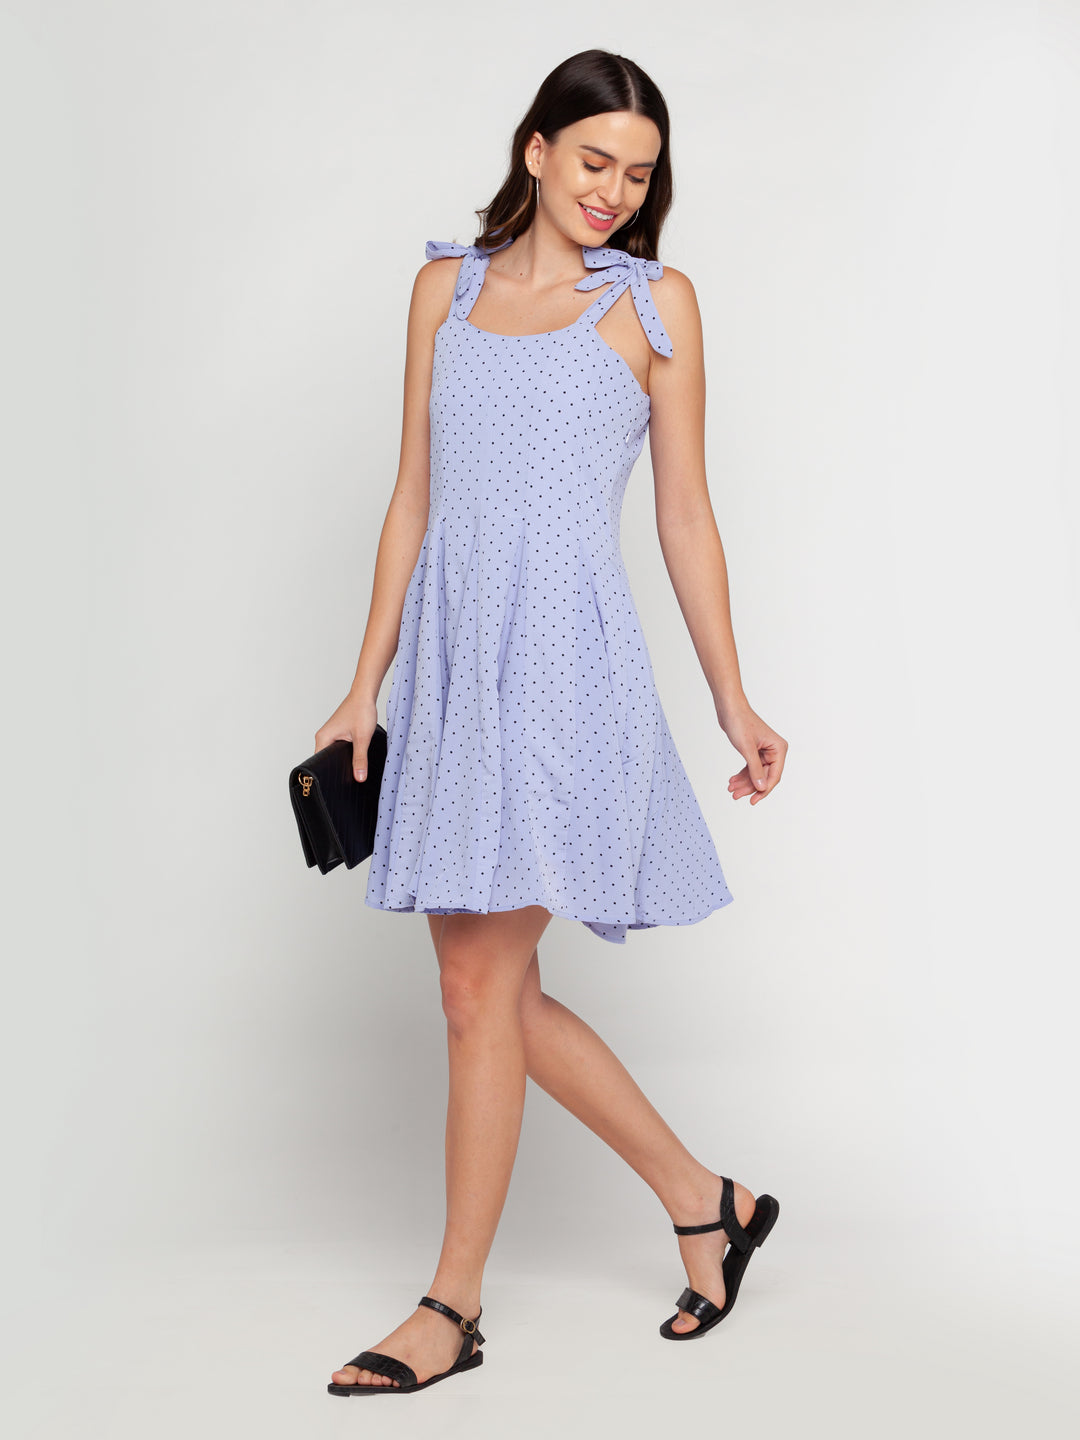 Blue Printed Strappy Short Dress For Women